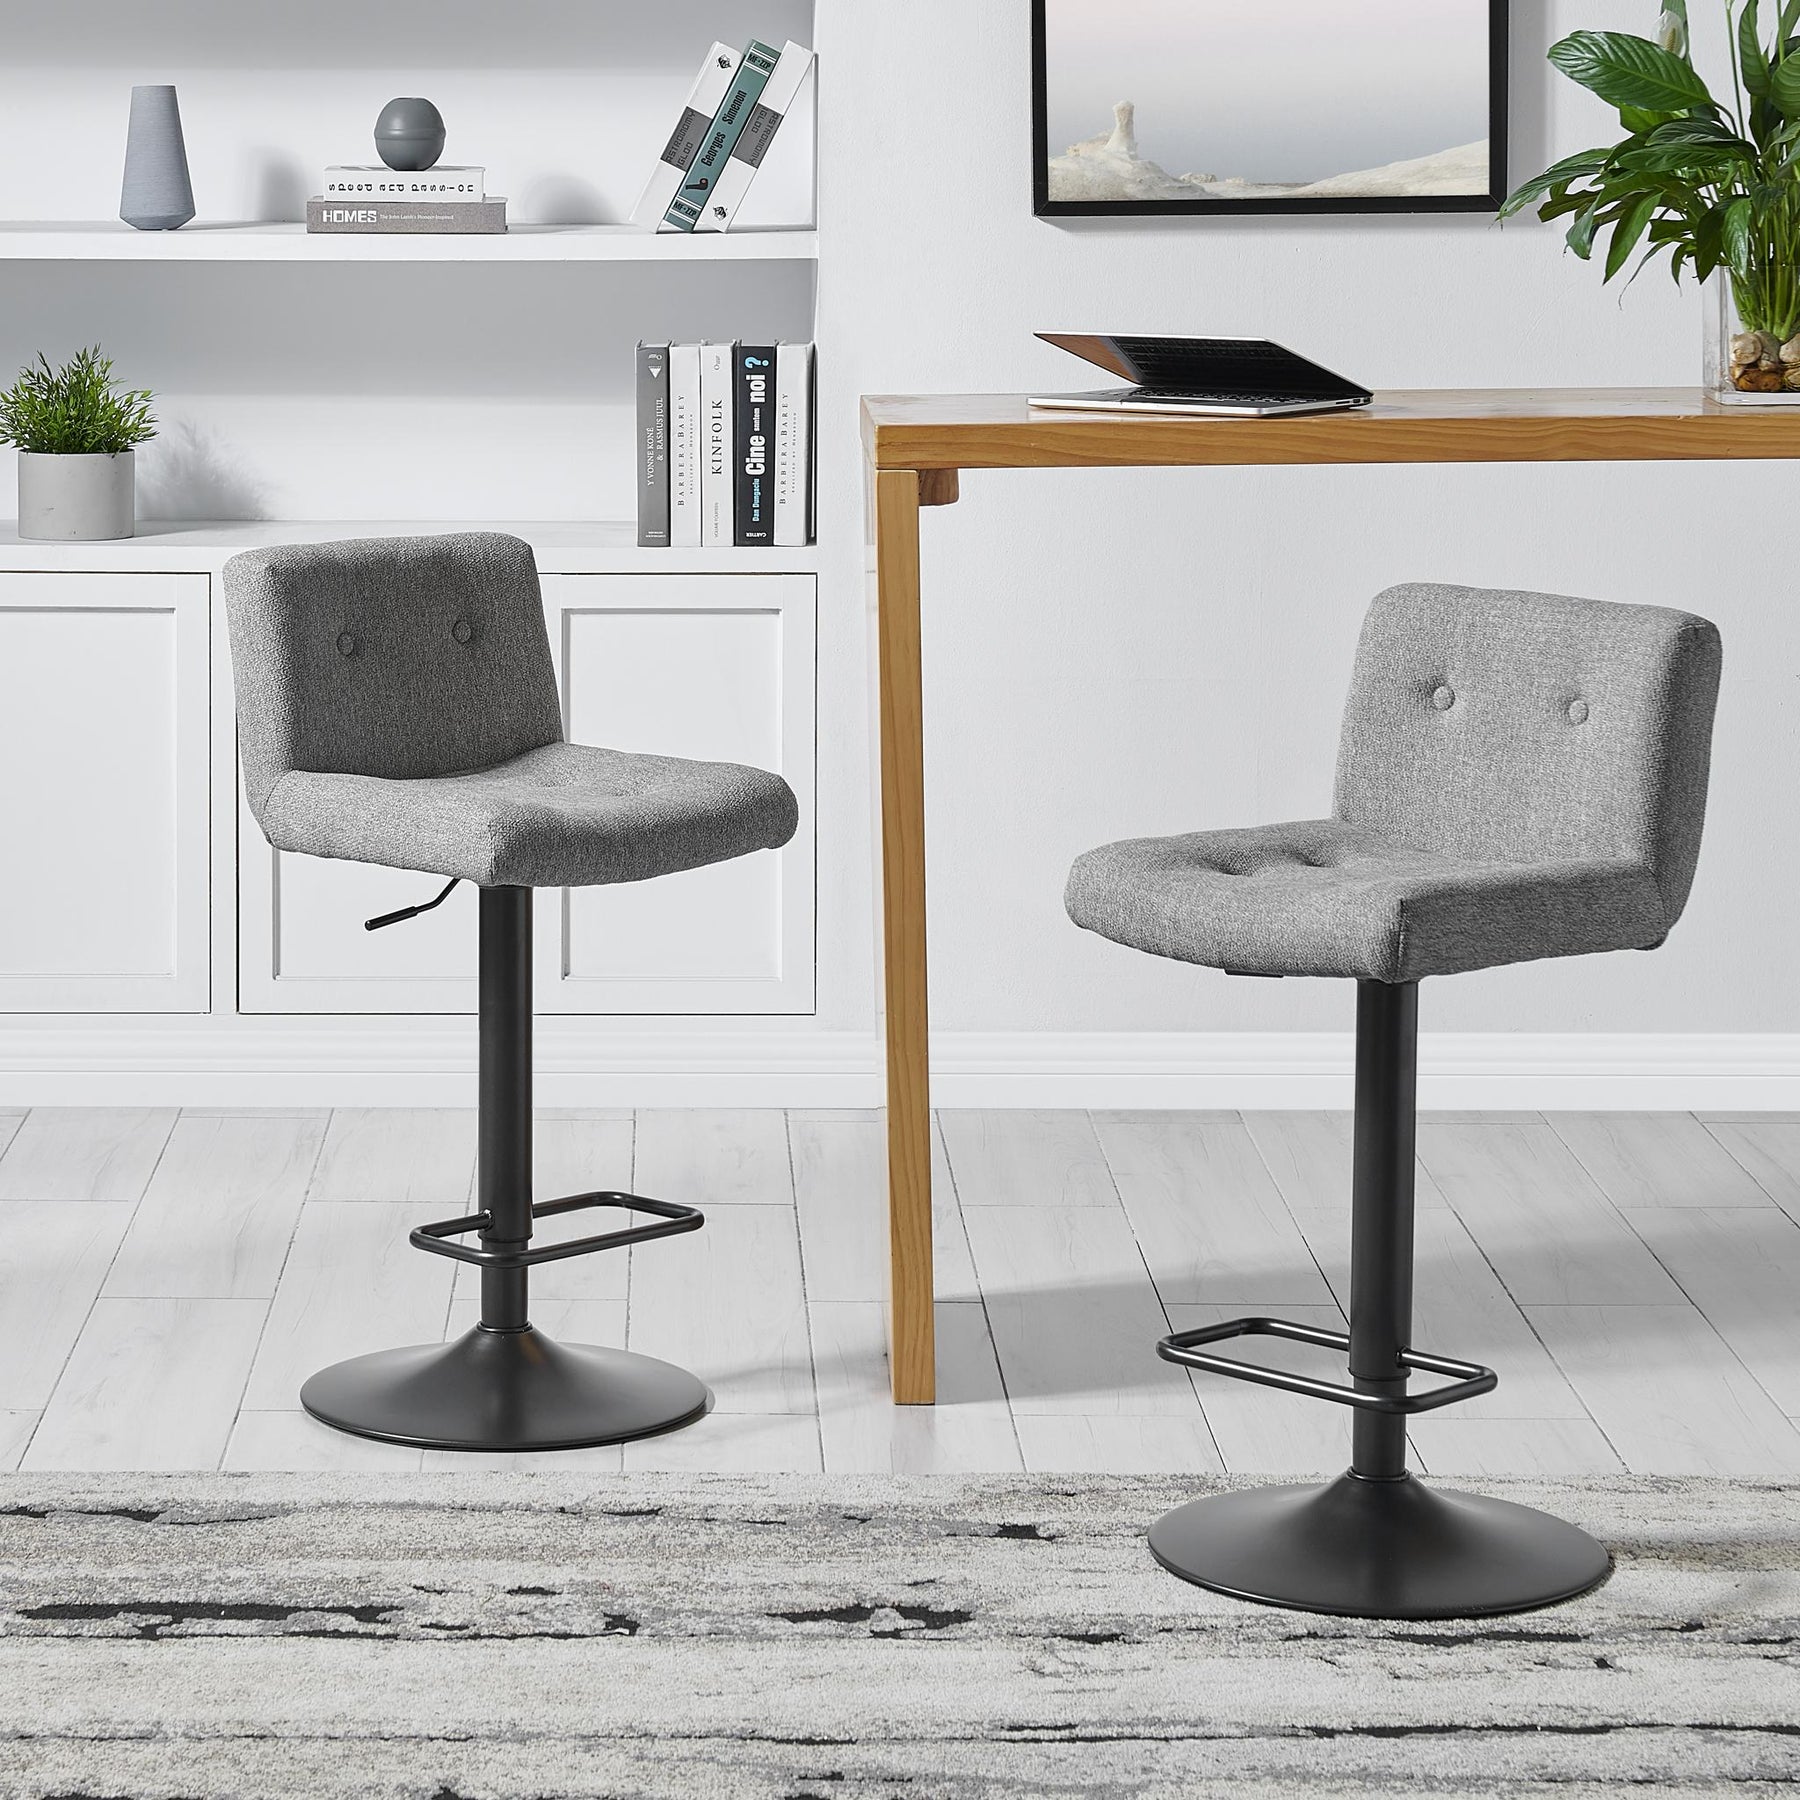 Jude KD Fabric Gaslift Swivel Bar Stool (Set of 2) by New Pacific Direct - 9300117